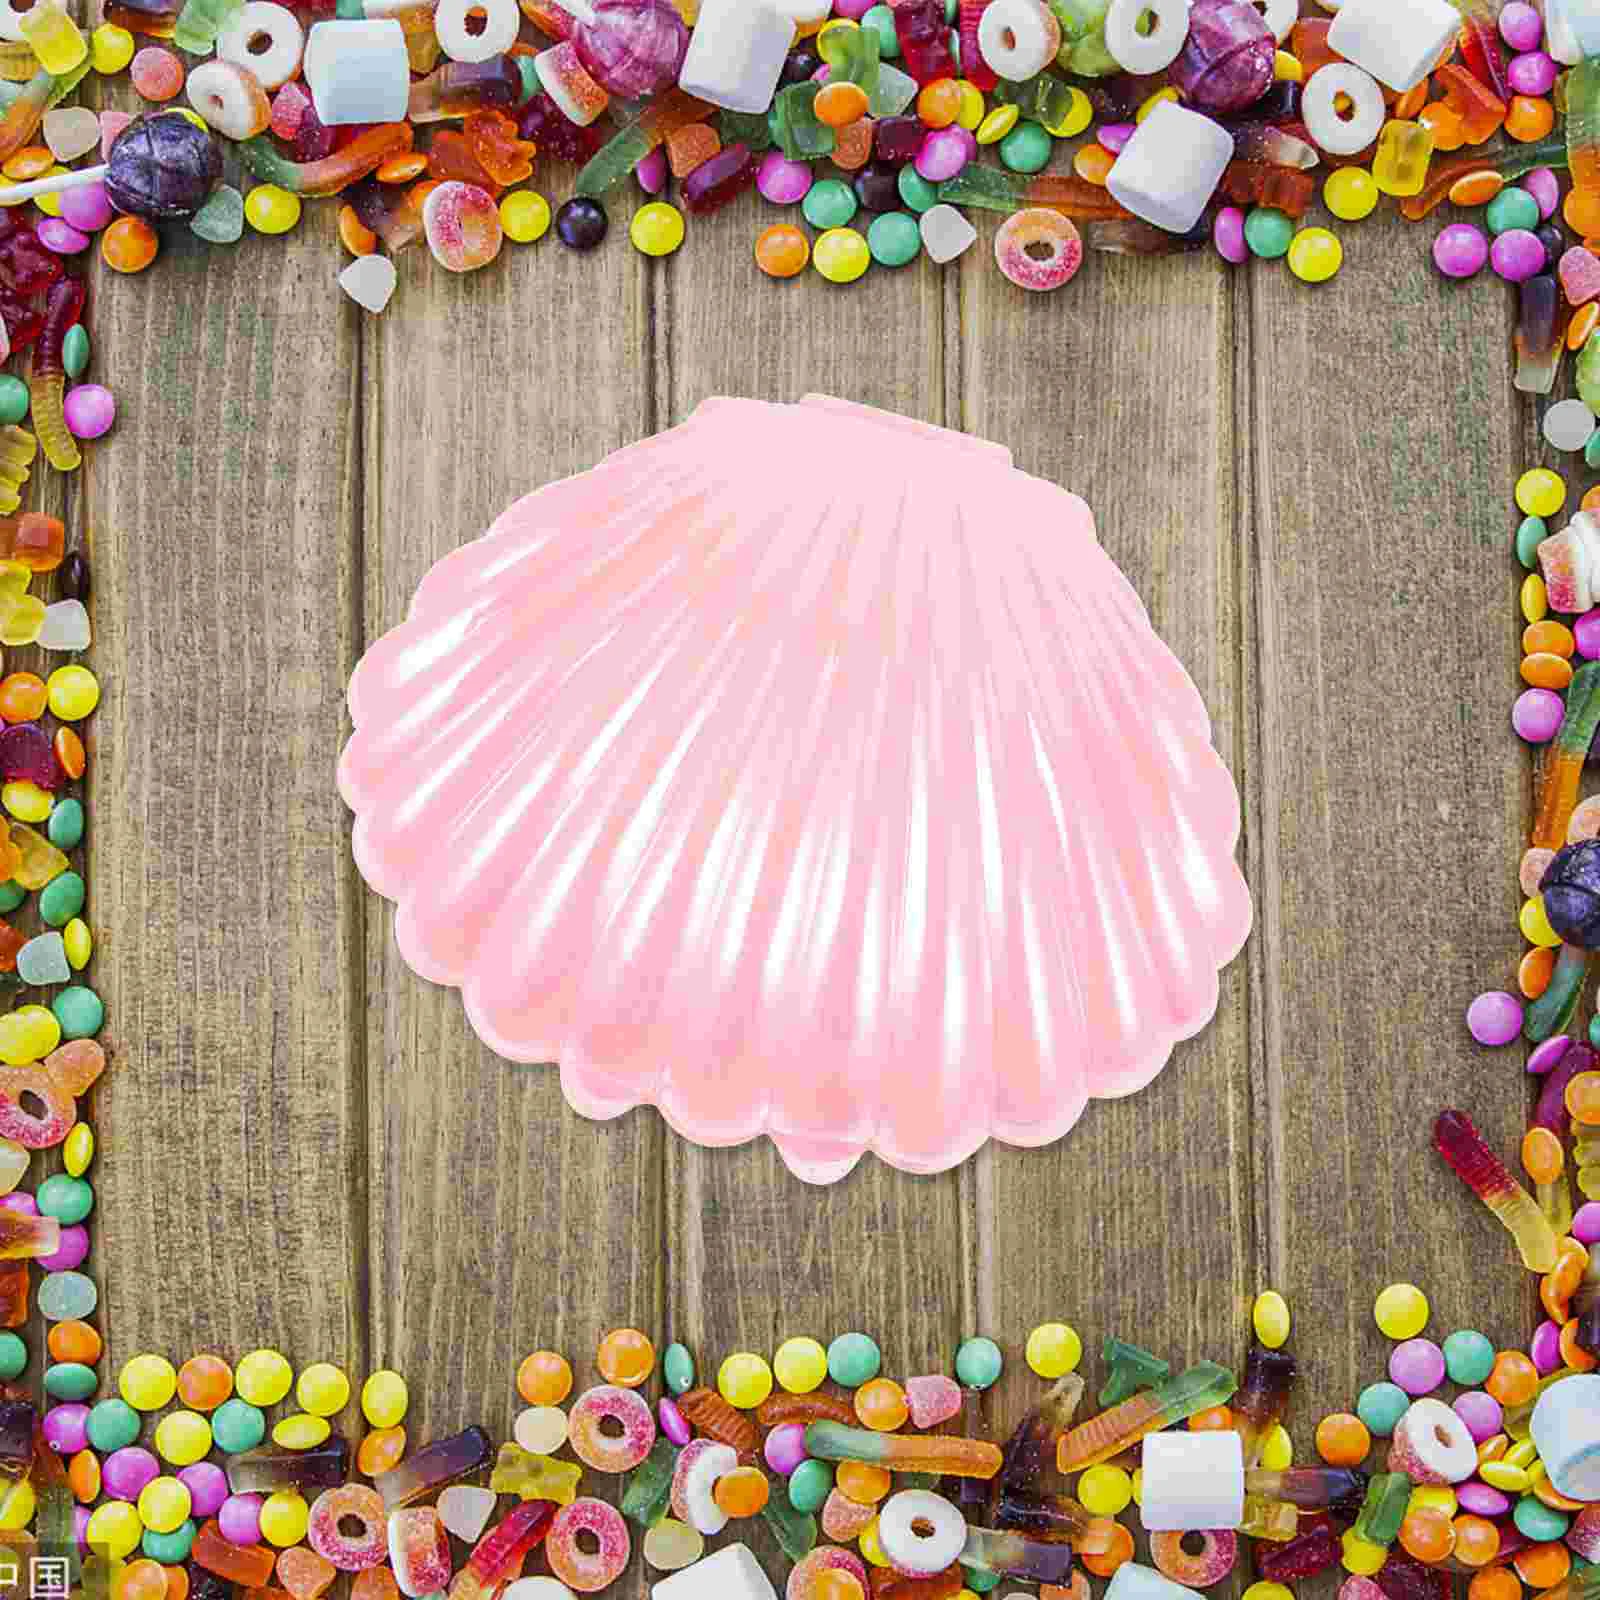 

10 Pcs Candy Box Container Table Containers Storage Small Jar Dish Pp Seashell Jewelry Plastic Holder Party Favor